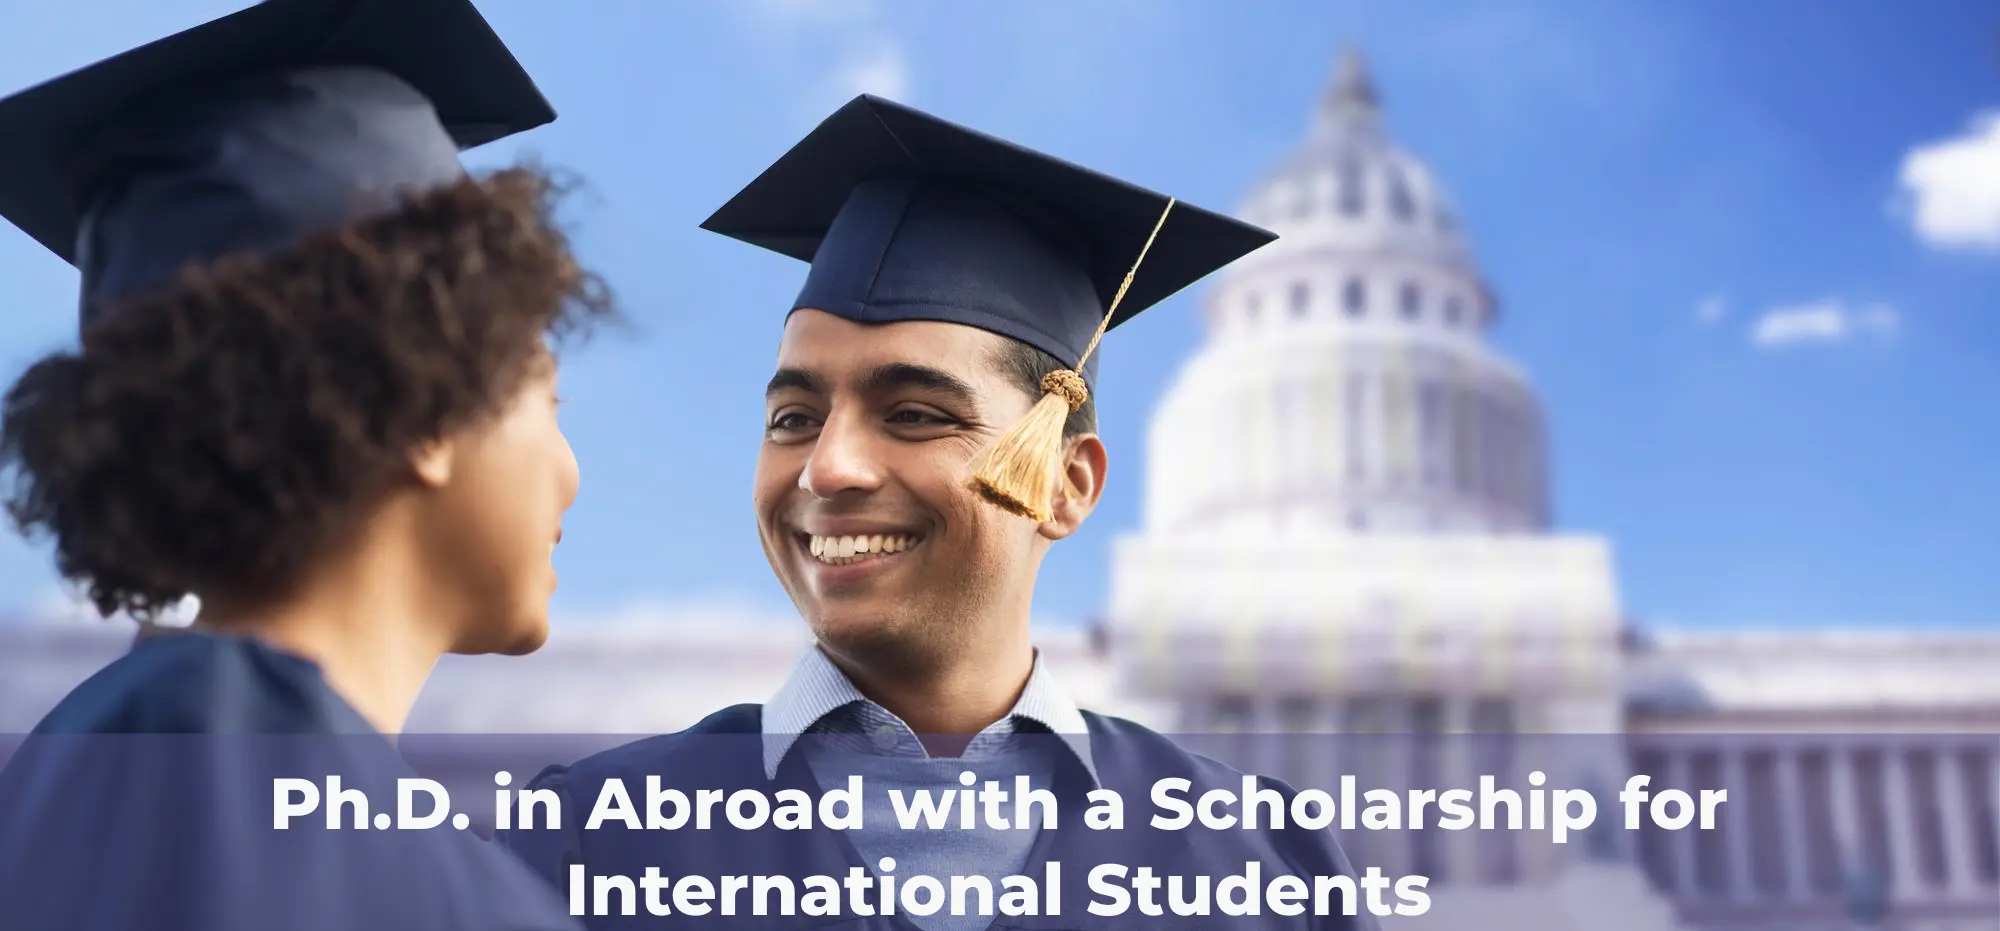 Ph.D. in abroad with a scholarship for international students